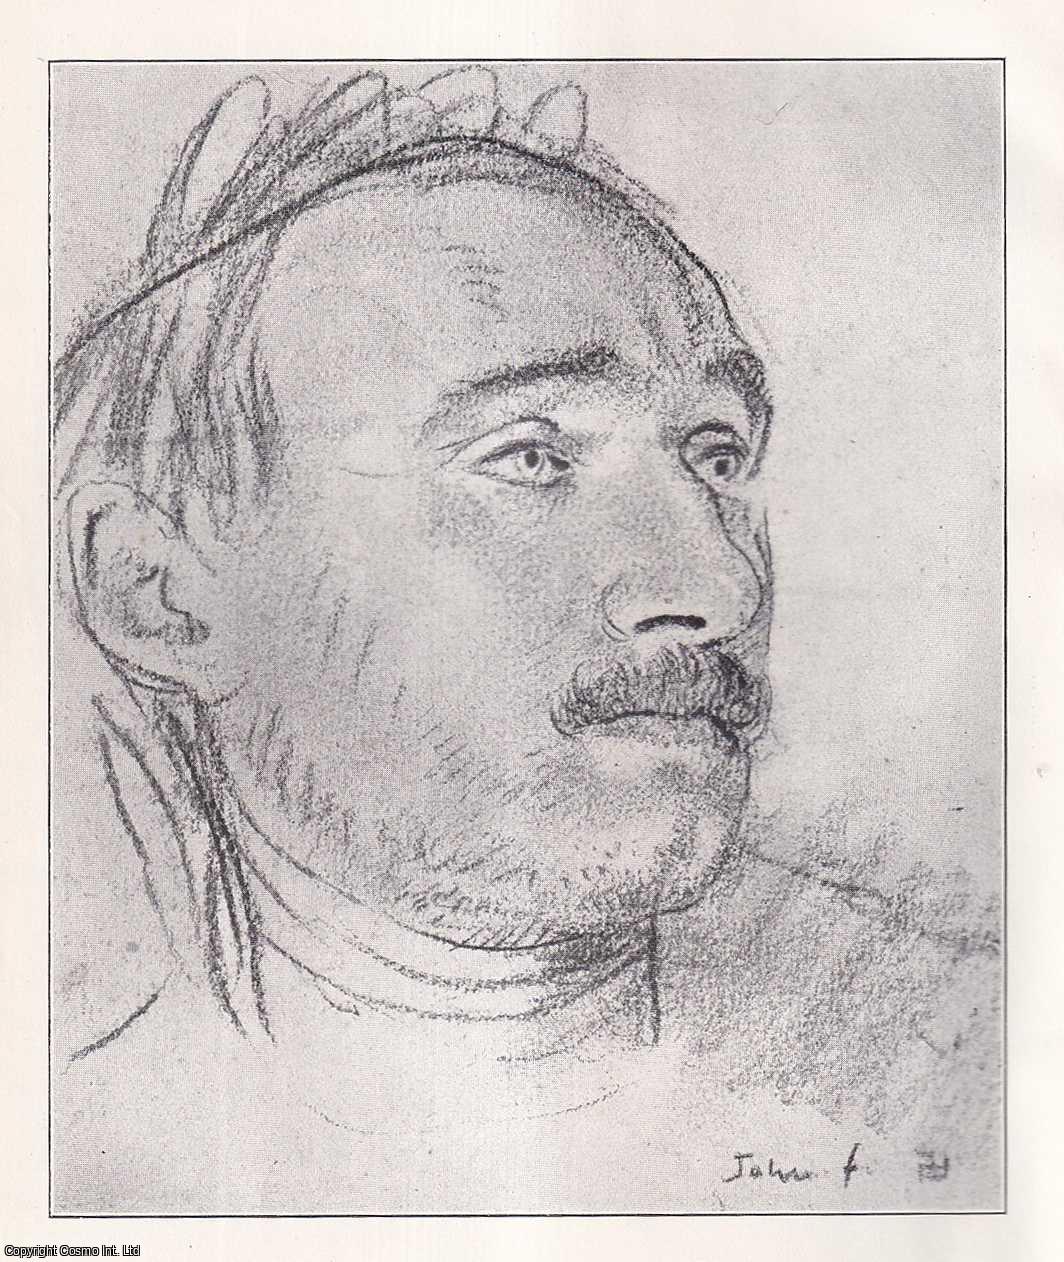 Sketch by Augustus John - Dr John Sampson by Augustus John. An uncommon original sketch from the Journal of the Gypsy Lore Society, 1928.